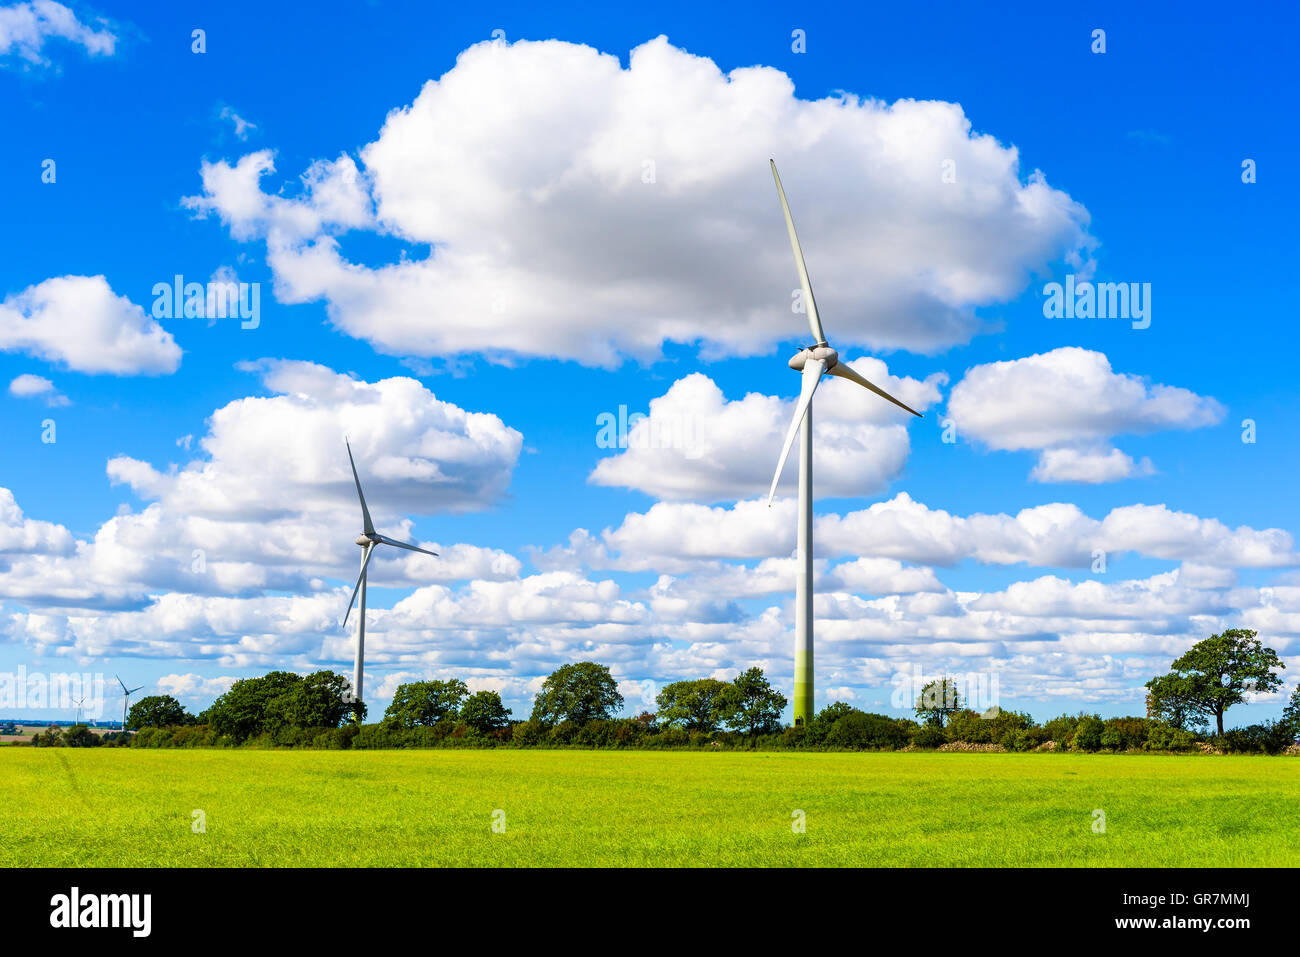 Sustainable energy from wind turbines in flat farmland with fine clouds overhead. Skane in southern Sweden. Stock Photo